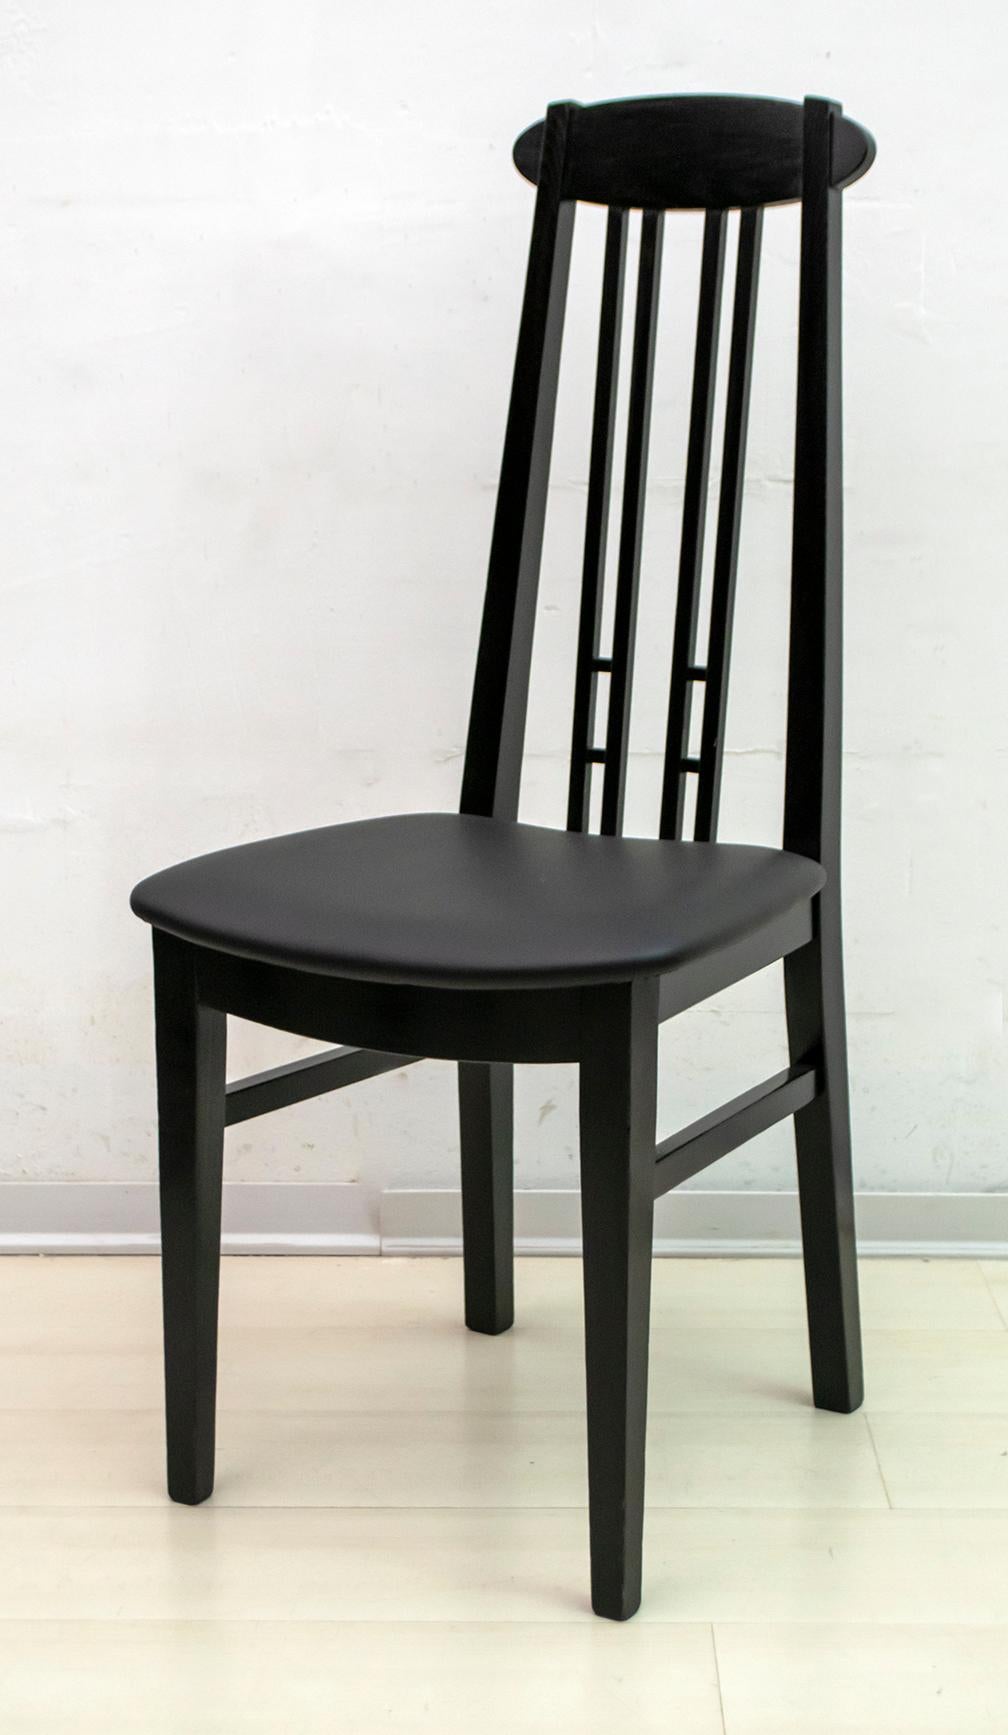 Ebonized After Charles Rennie Mackintosh 6 Black Lacquered High-Backed Chairs, 1979